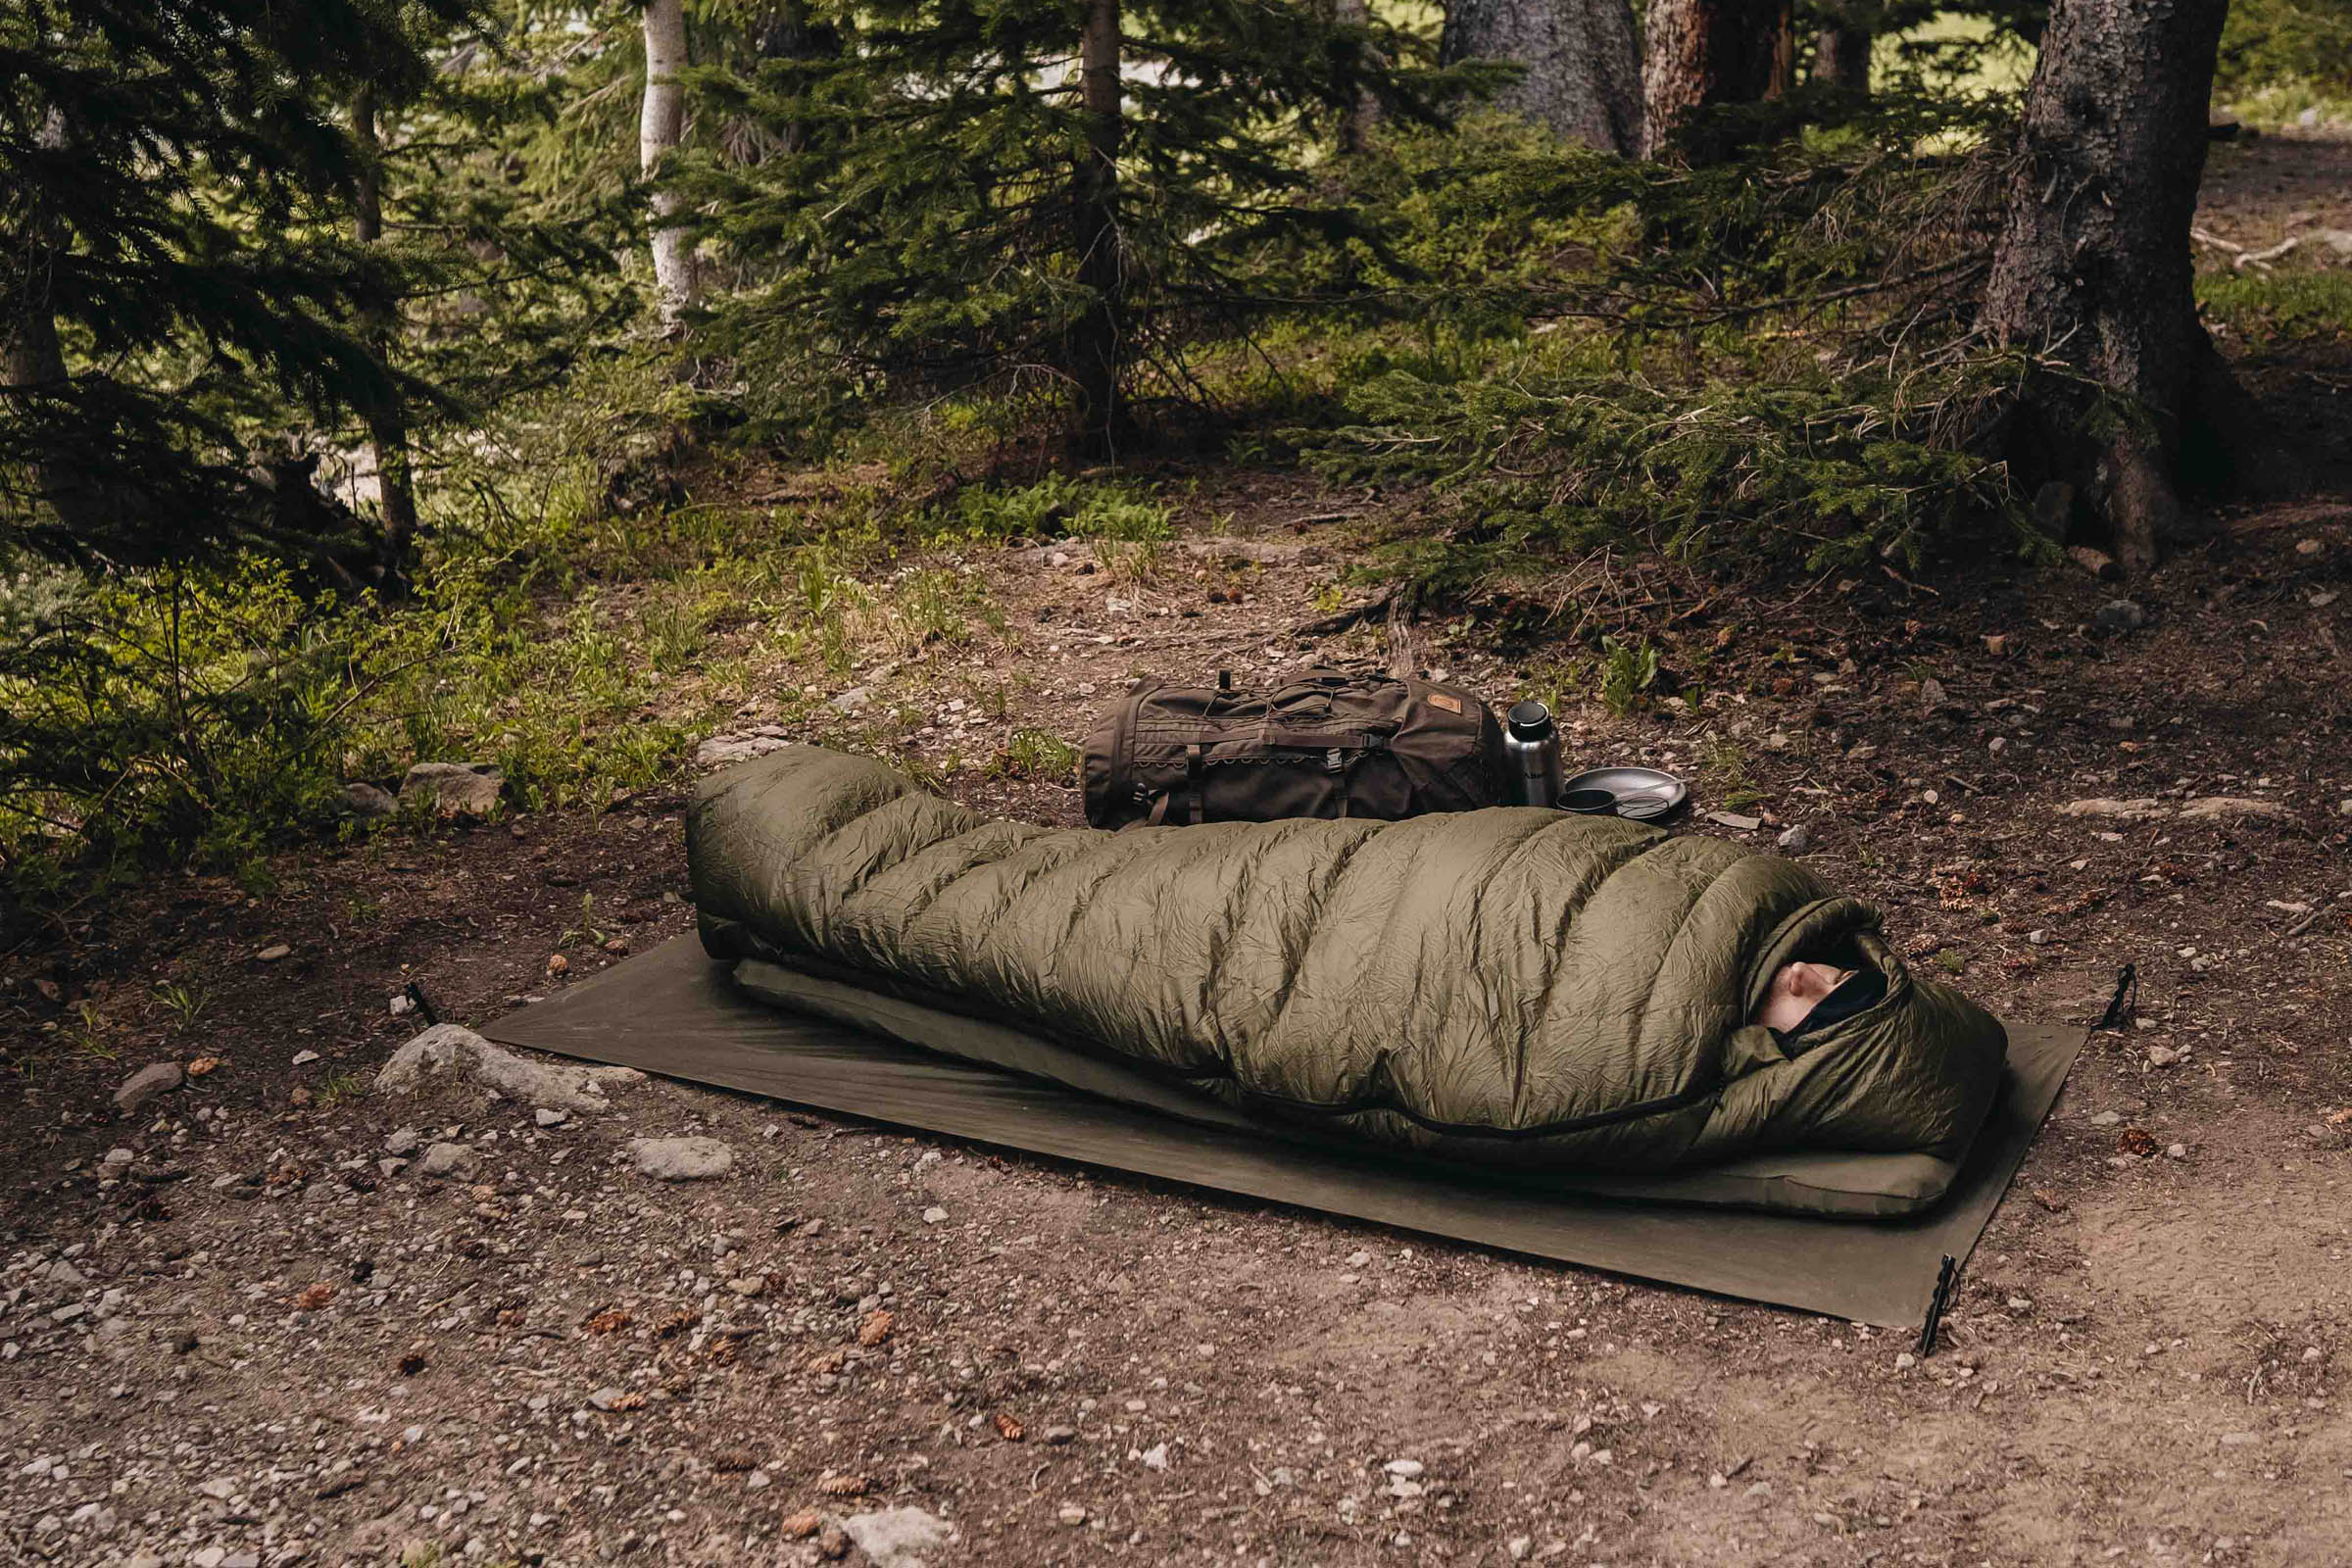 Bivvy Bag Camping Guide | Kit List & Where To Go